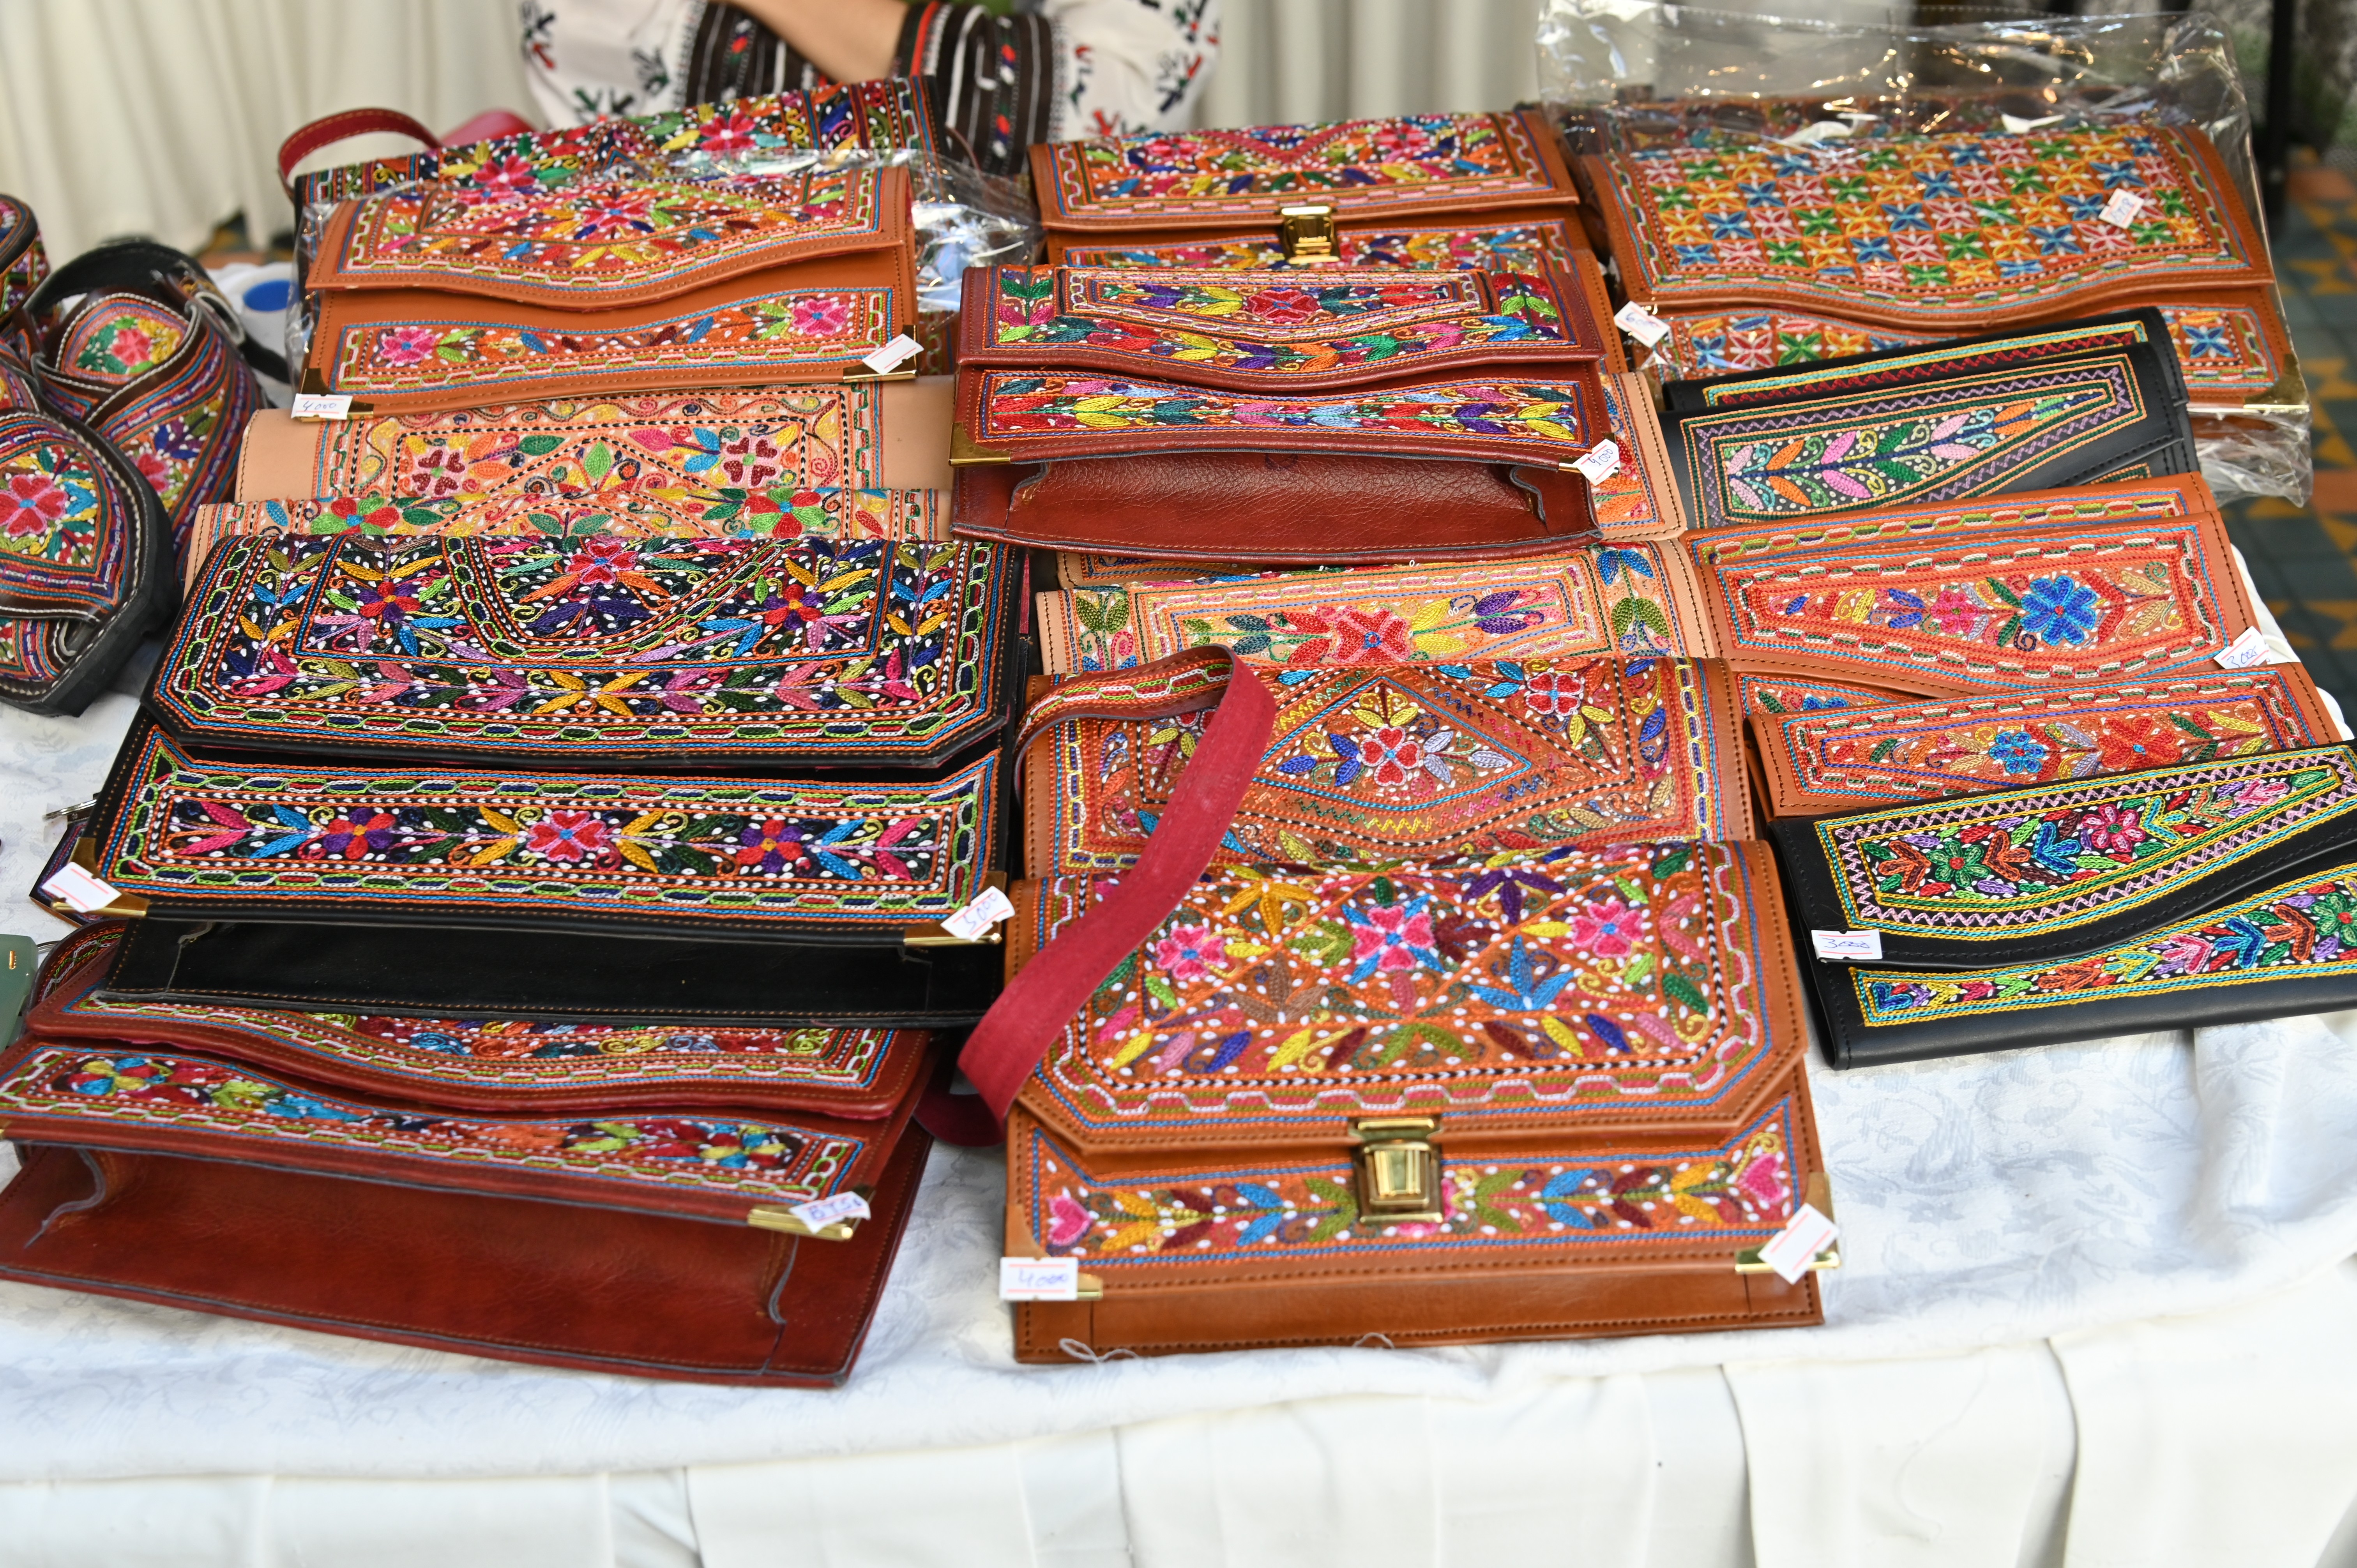 The collection of Embroidered purses